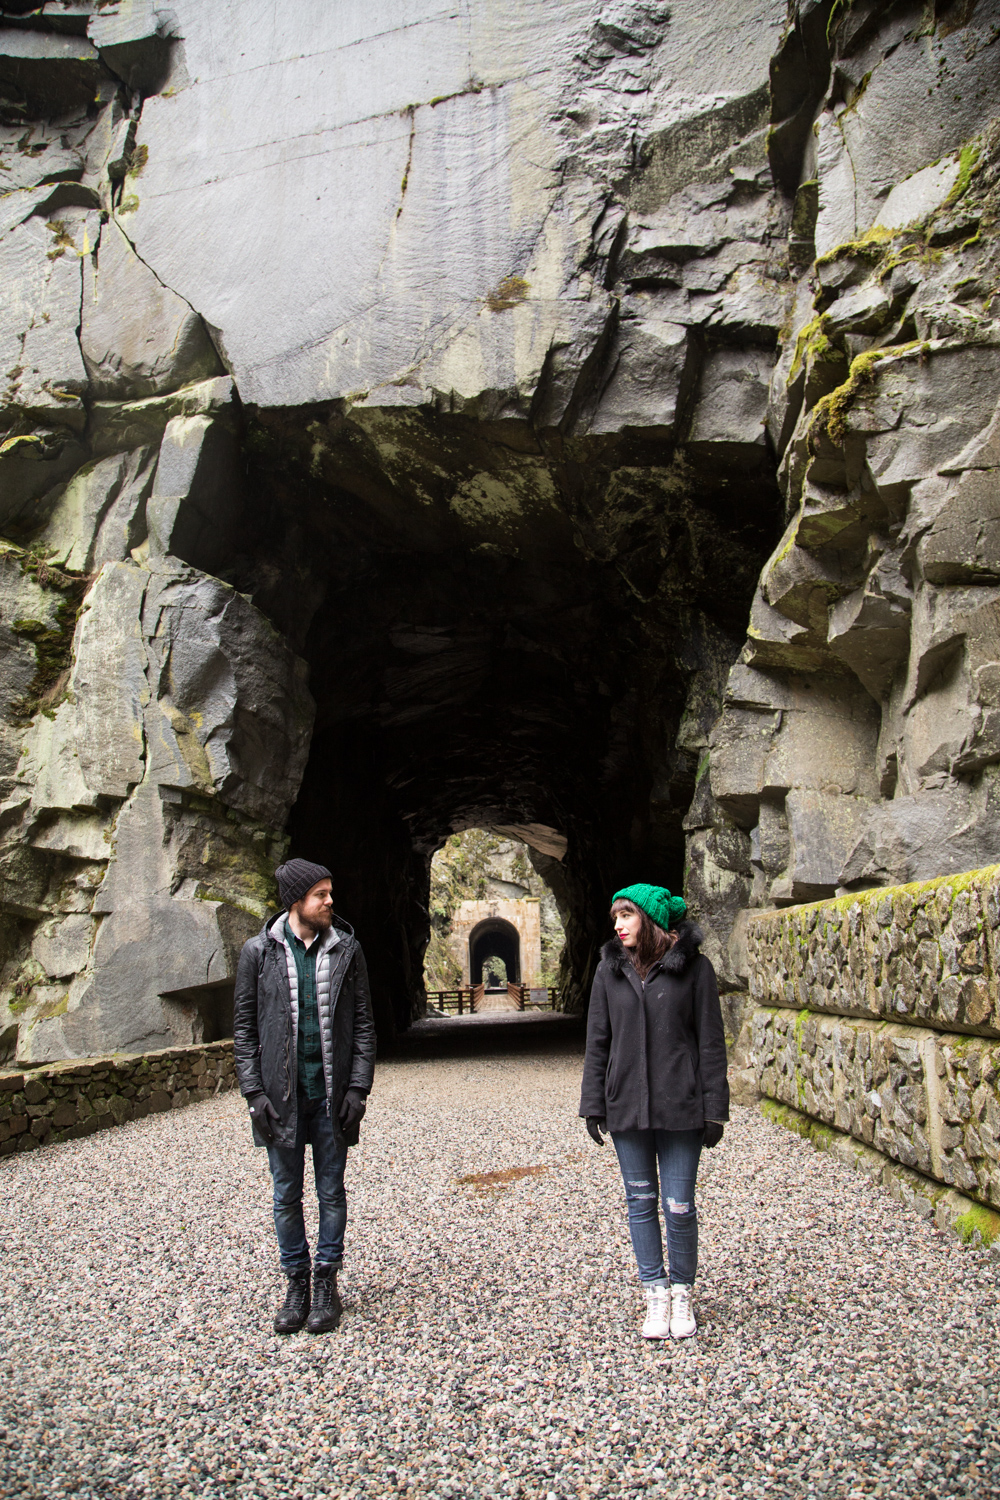 A Rainy Day at Othello Tunnels in Hope, British Columbia